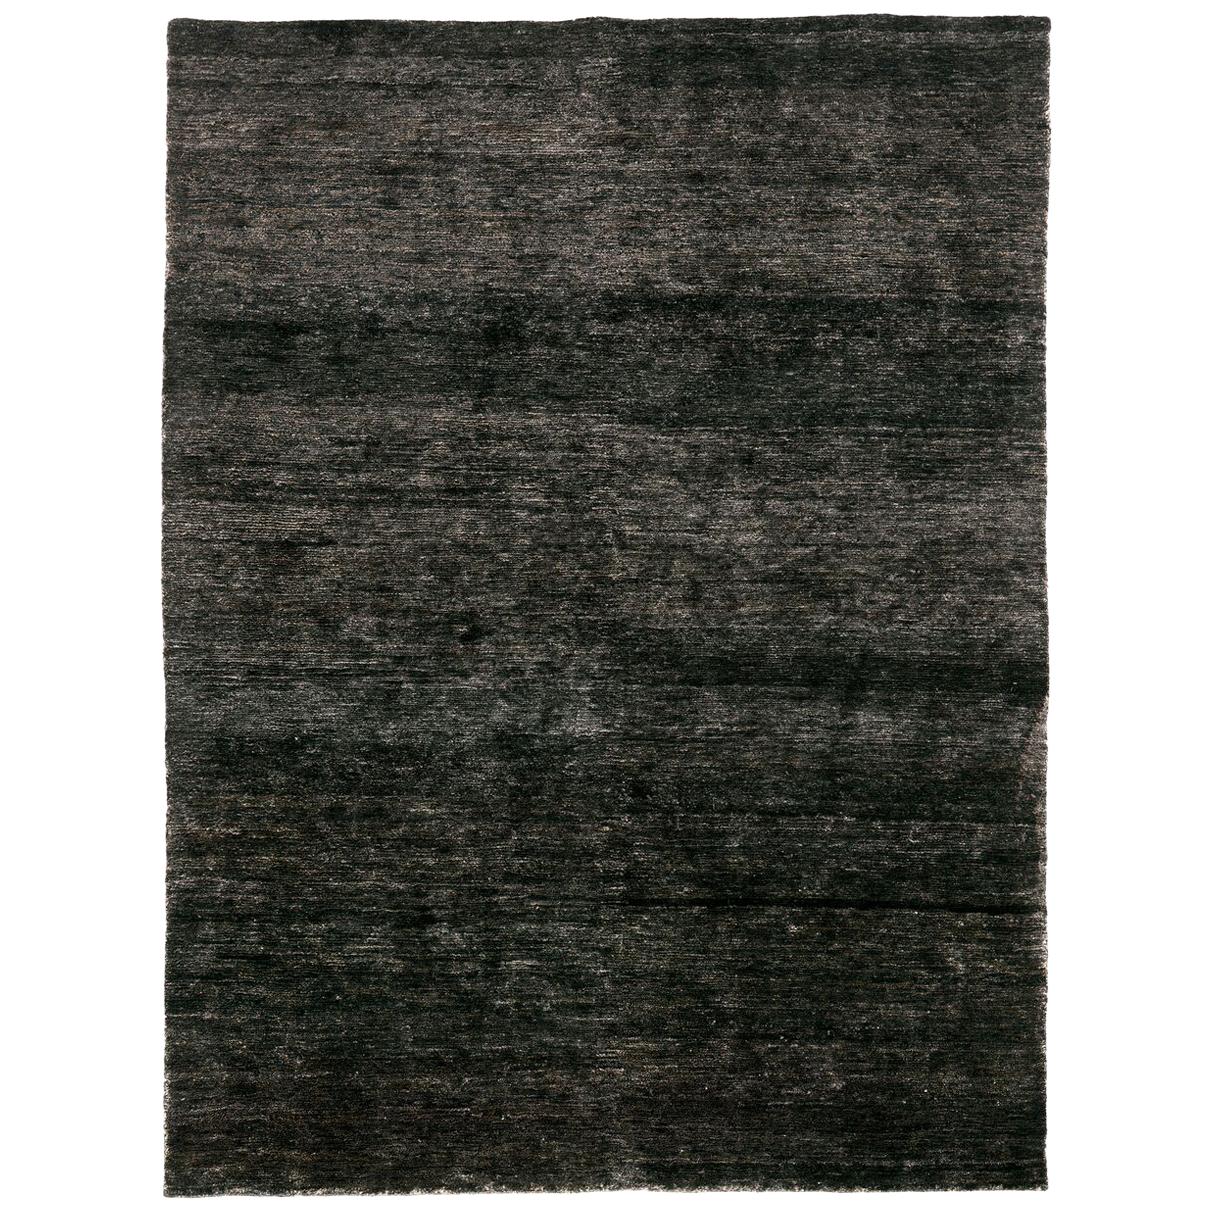 Noche Black Hand-Knotted Jute Rug by Nani Marquina & Ariadna Miquel, Small